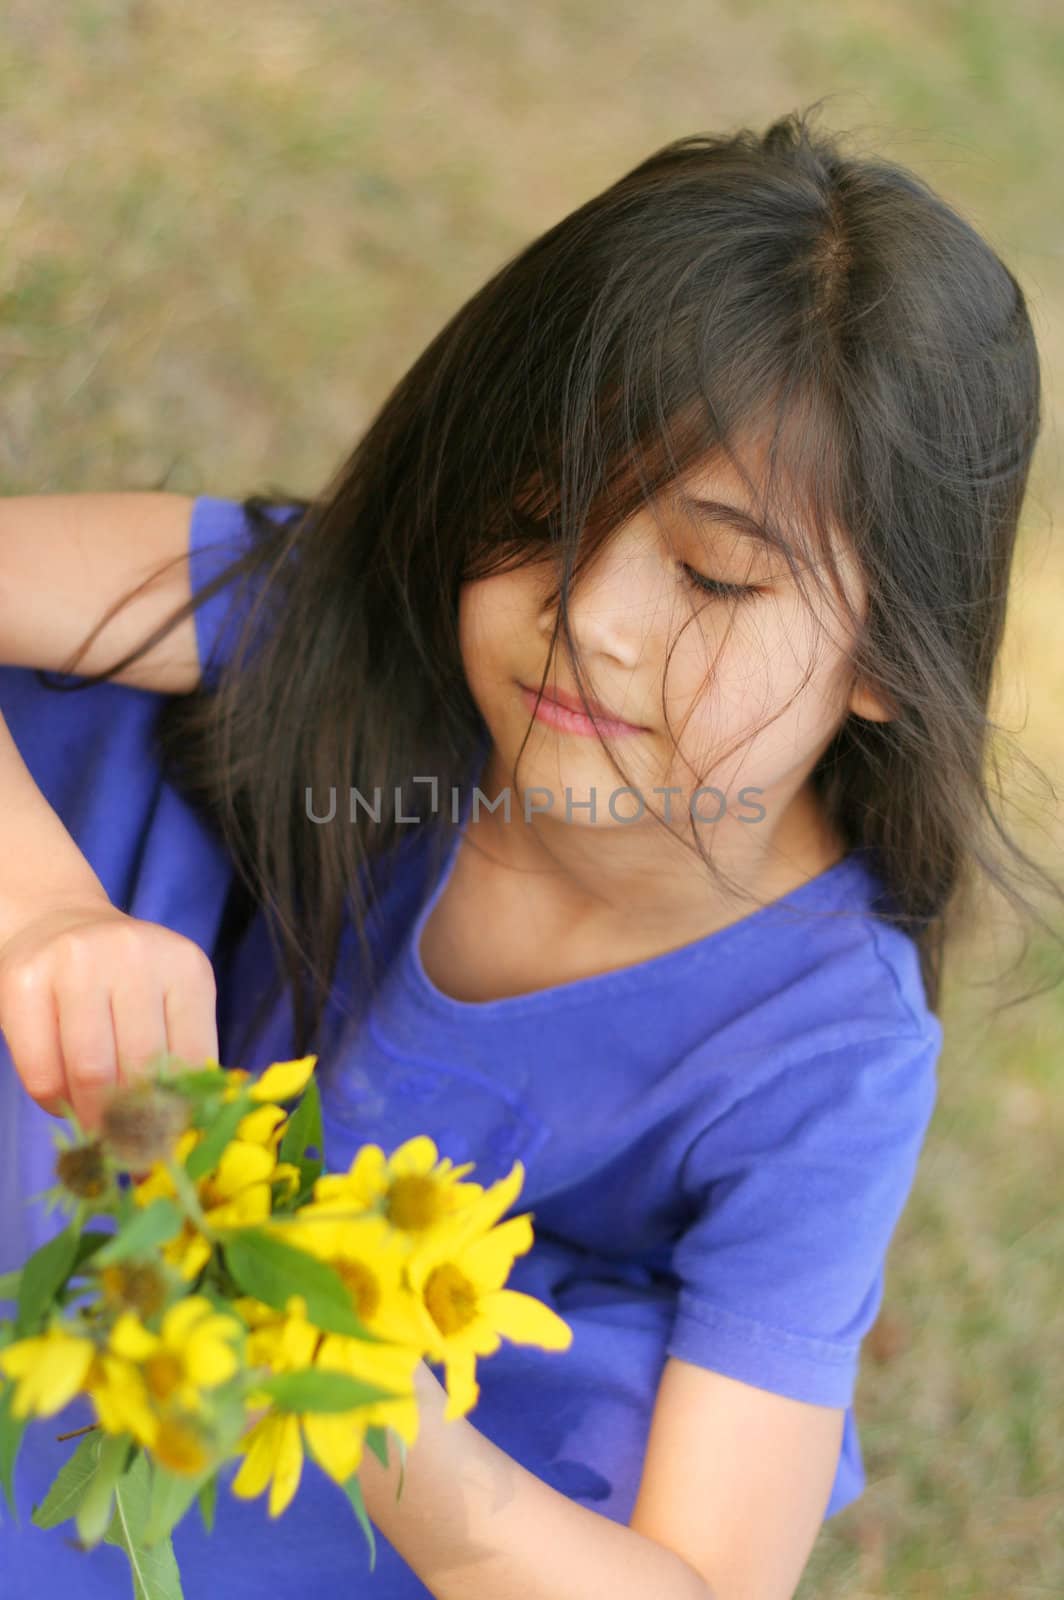 Little girl with handful of sunflowers by jarenwicklund